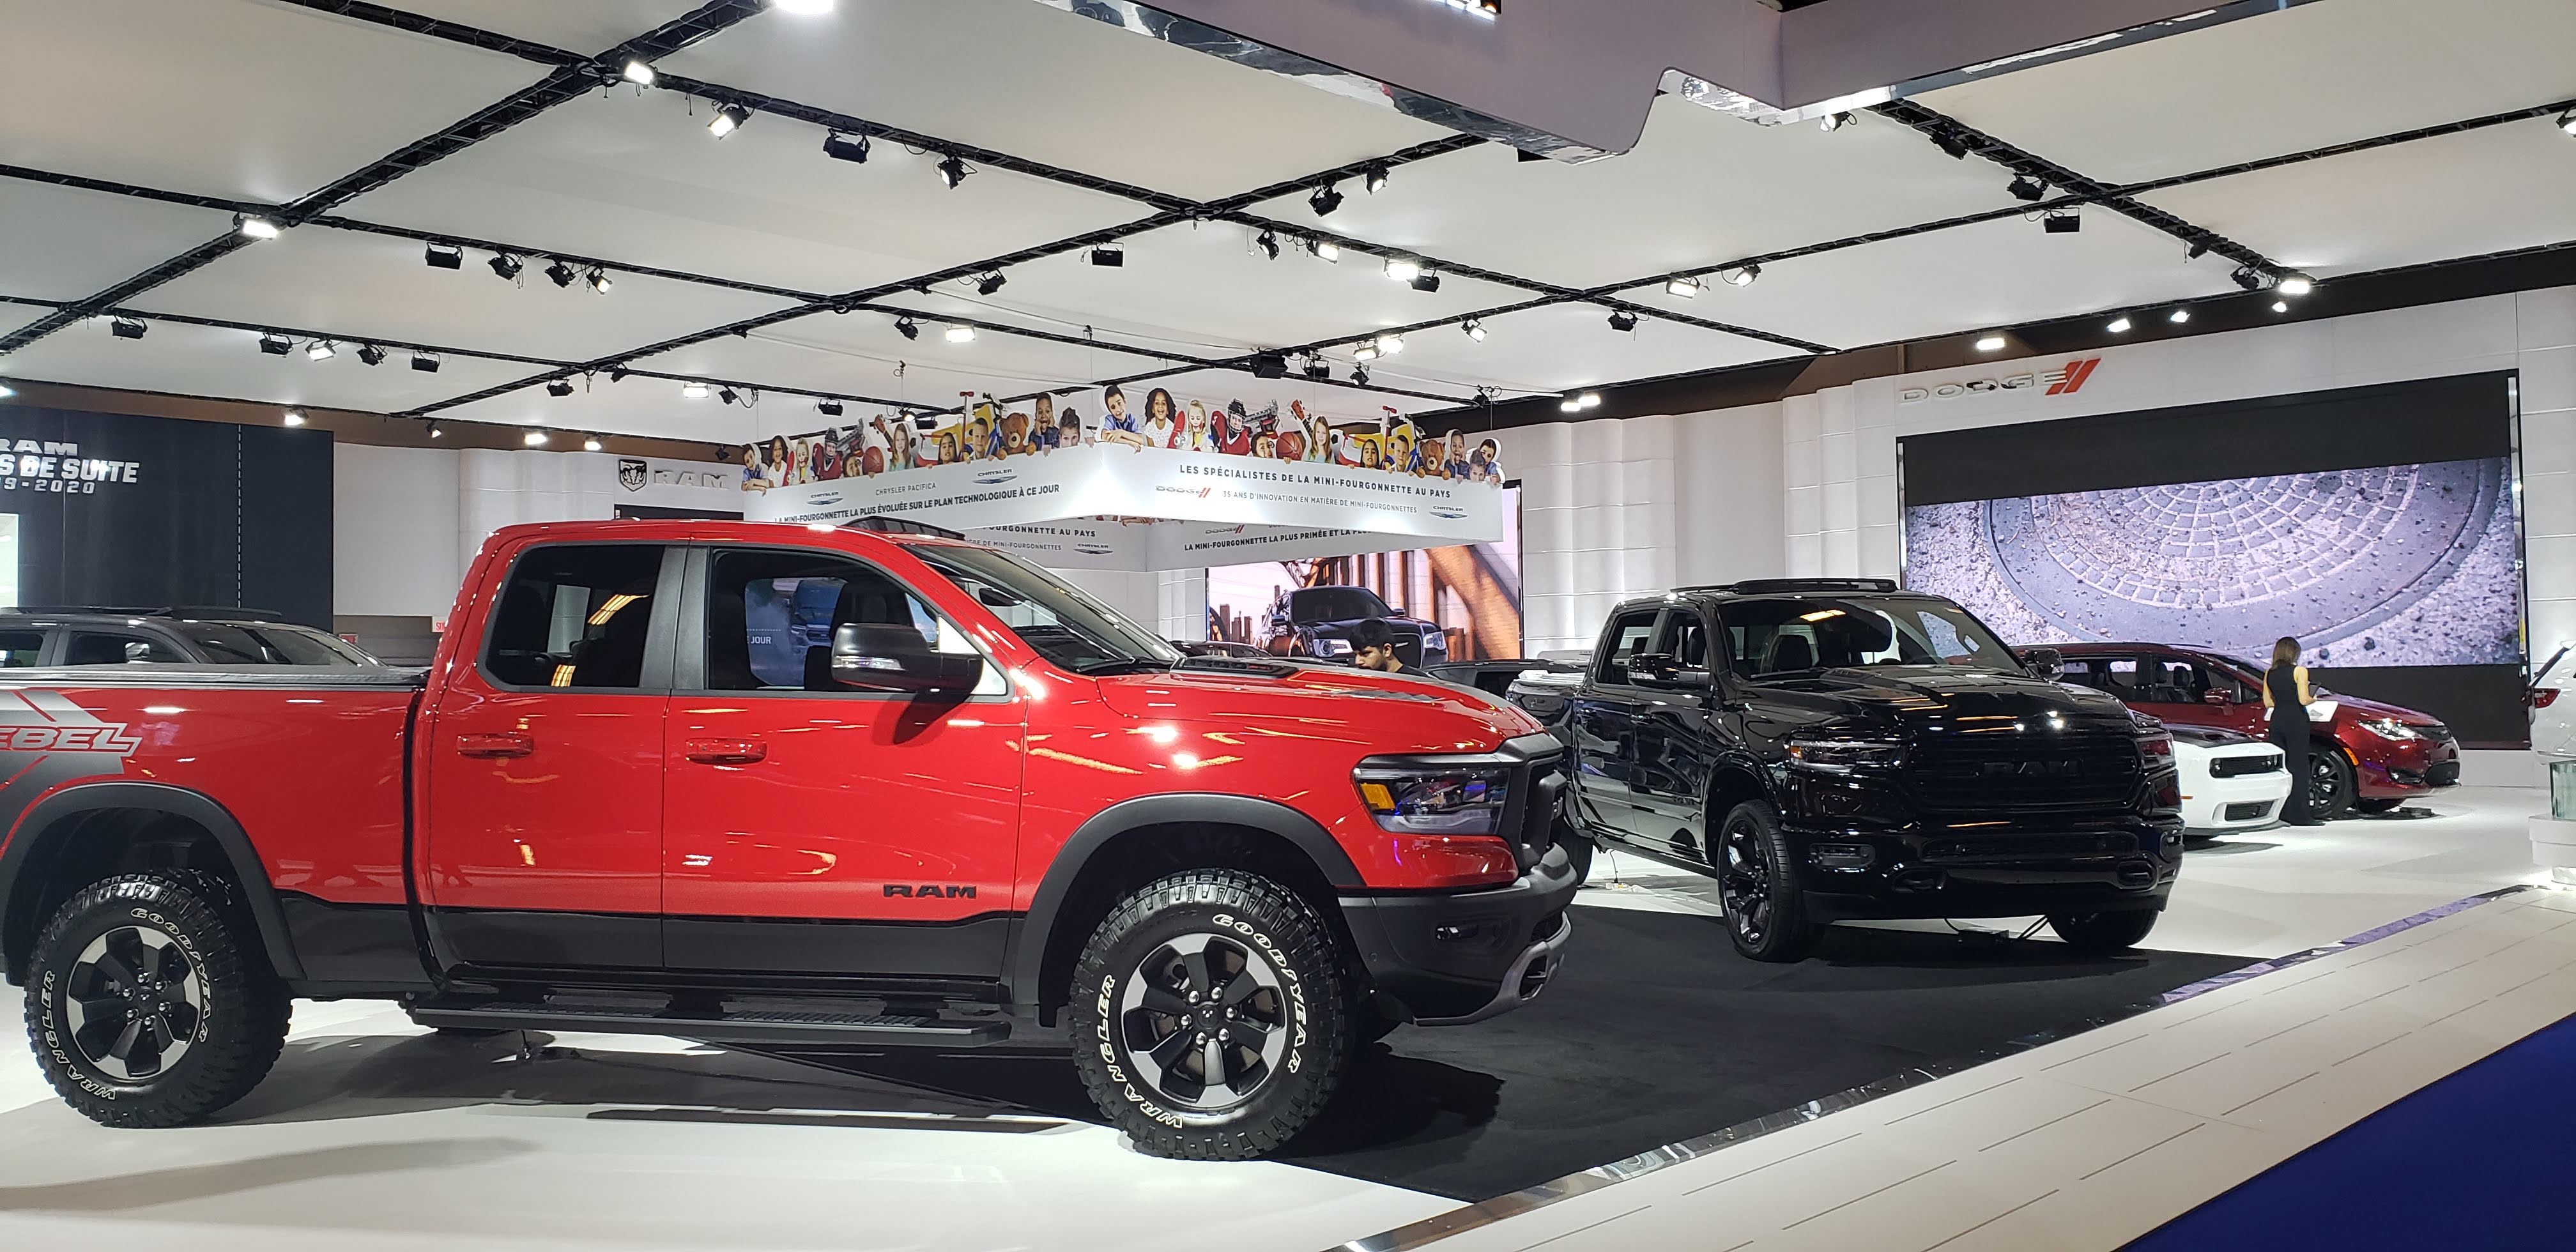 The 2020 Montreal AutoShow in Photos: Photo 6